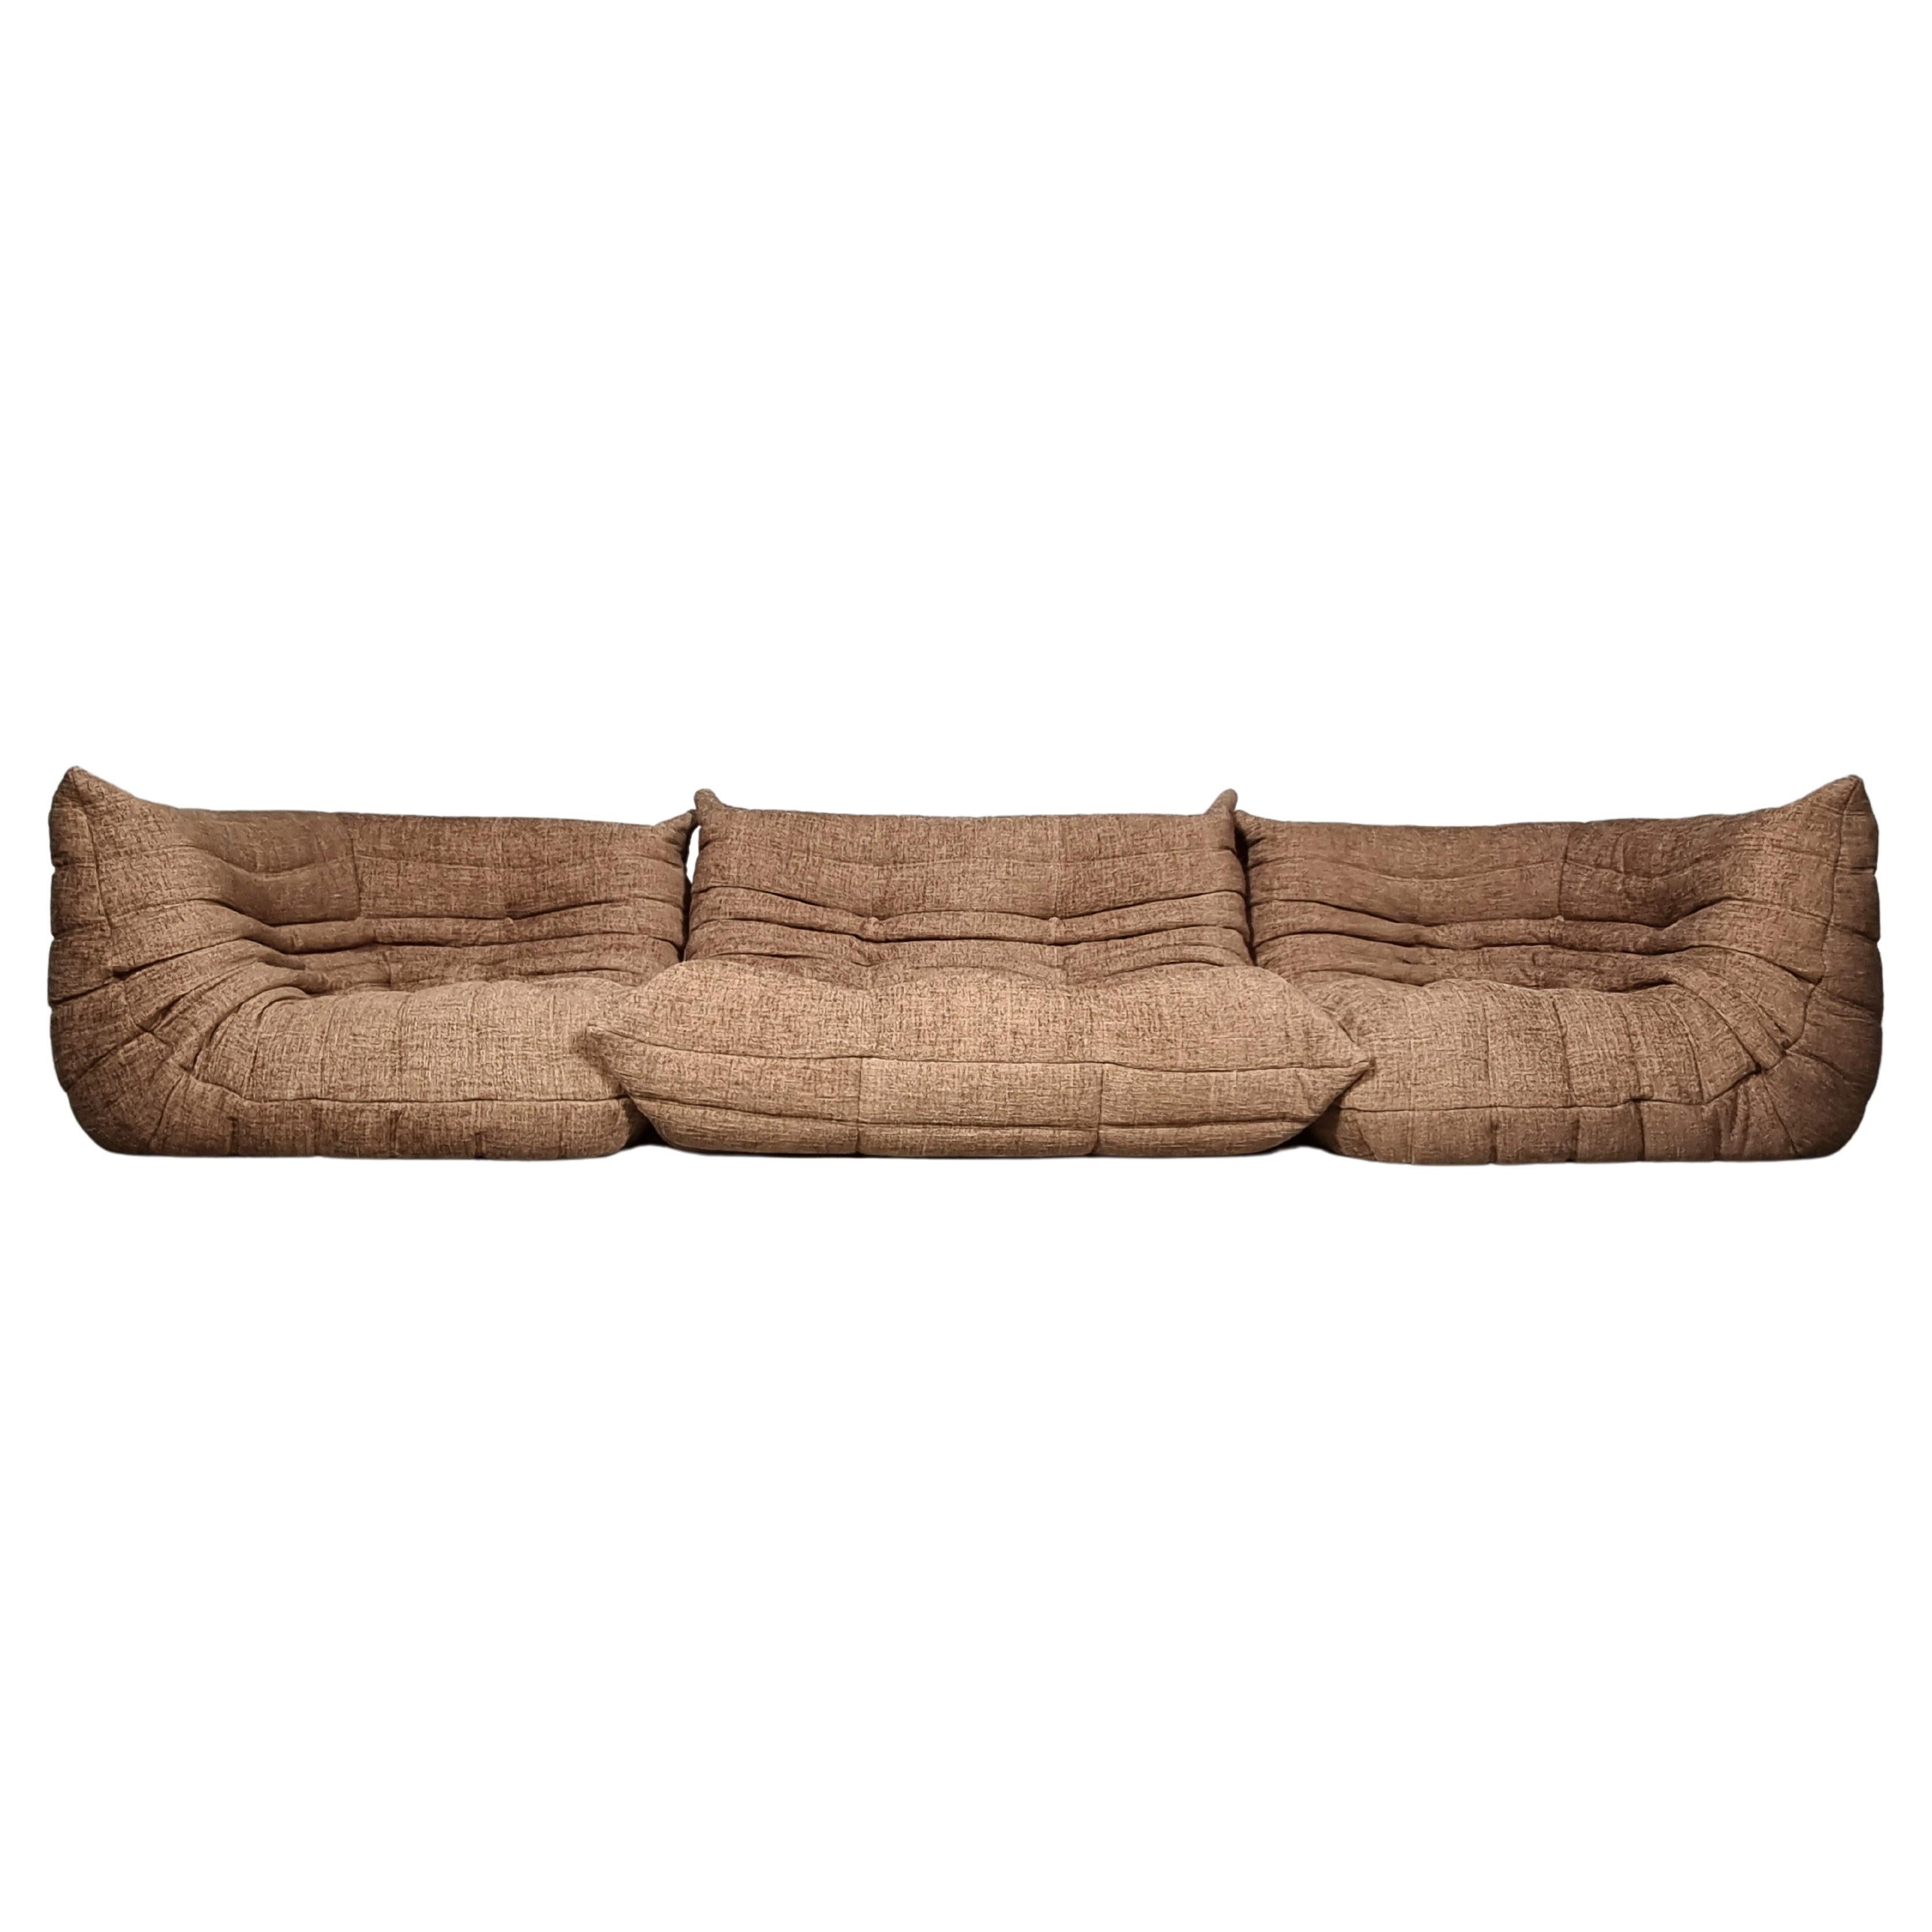 Togo 4-Seater Sectional Sofa by Michel Ducaroy for Ligne Roset, 1970s